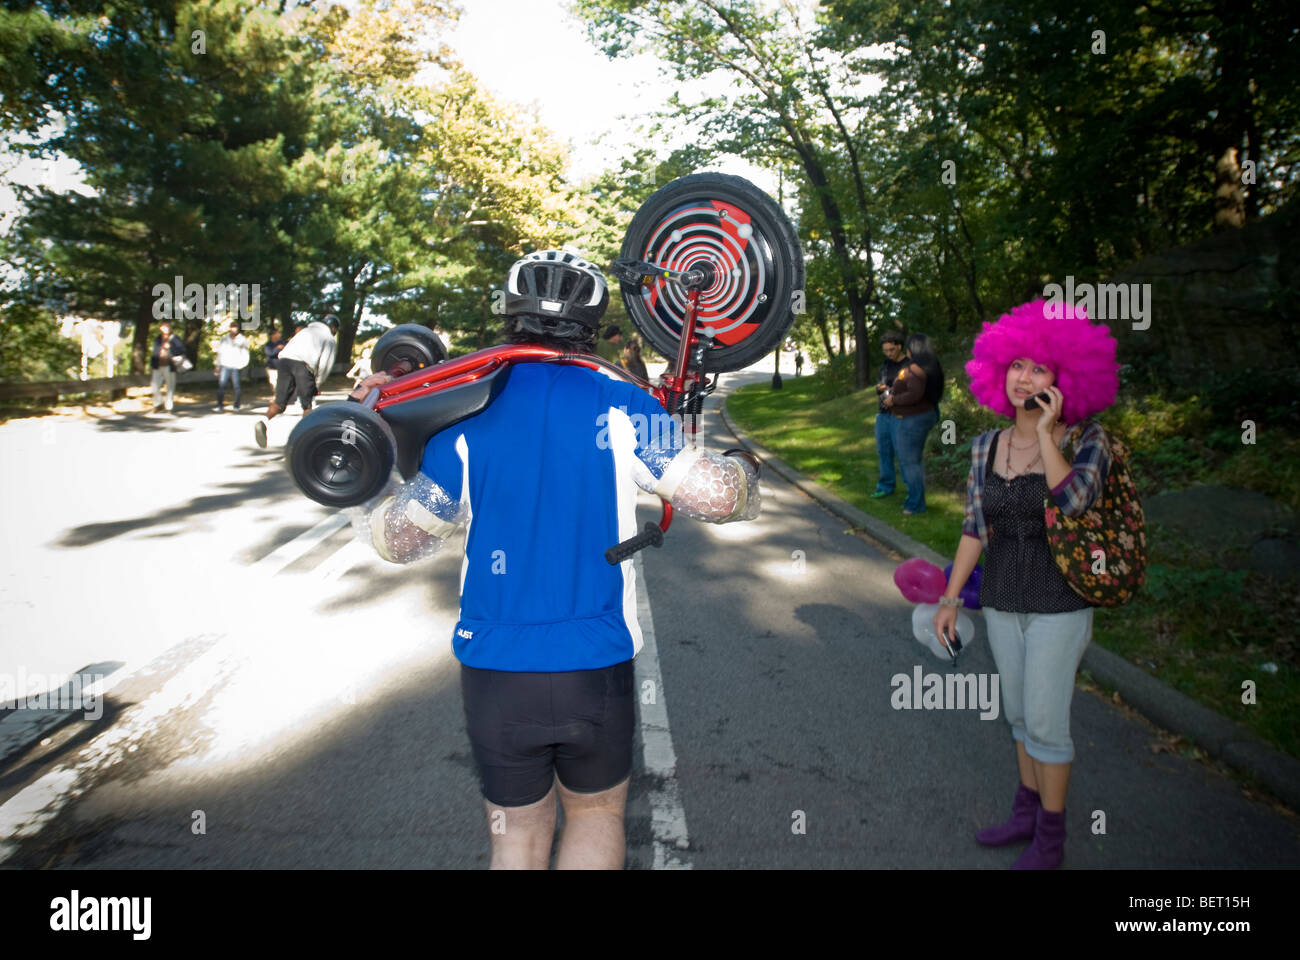 Participants in the 2nd Big Wheel Race in Central Park dangerously hurdle down hills in New York Stock Photo